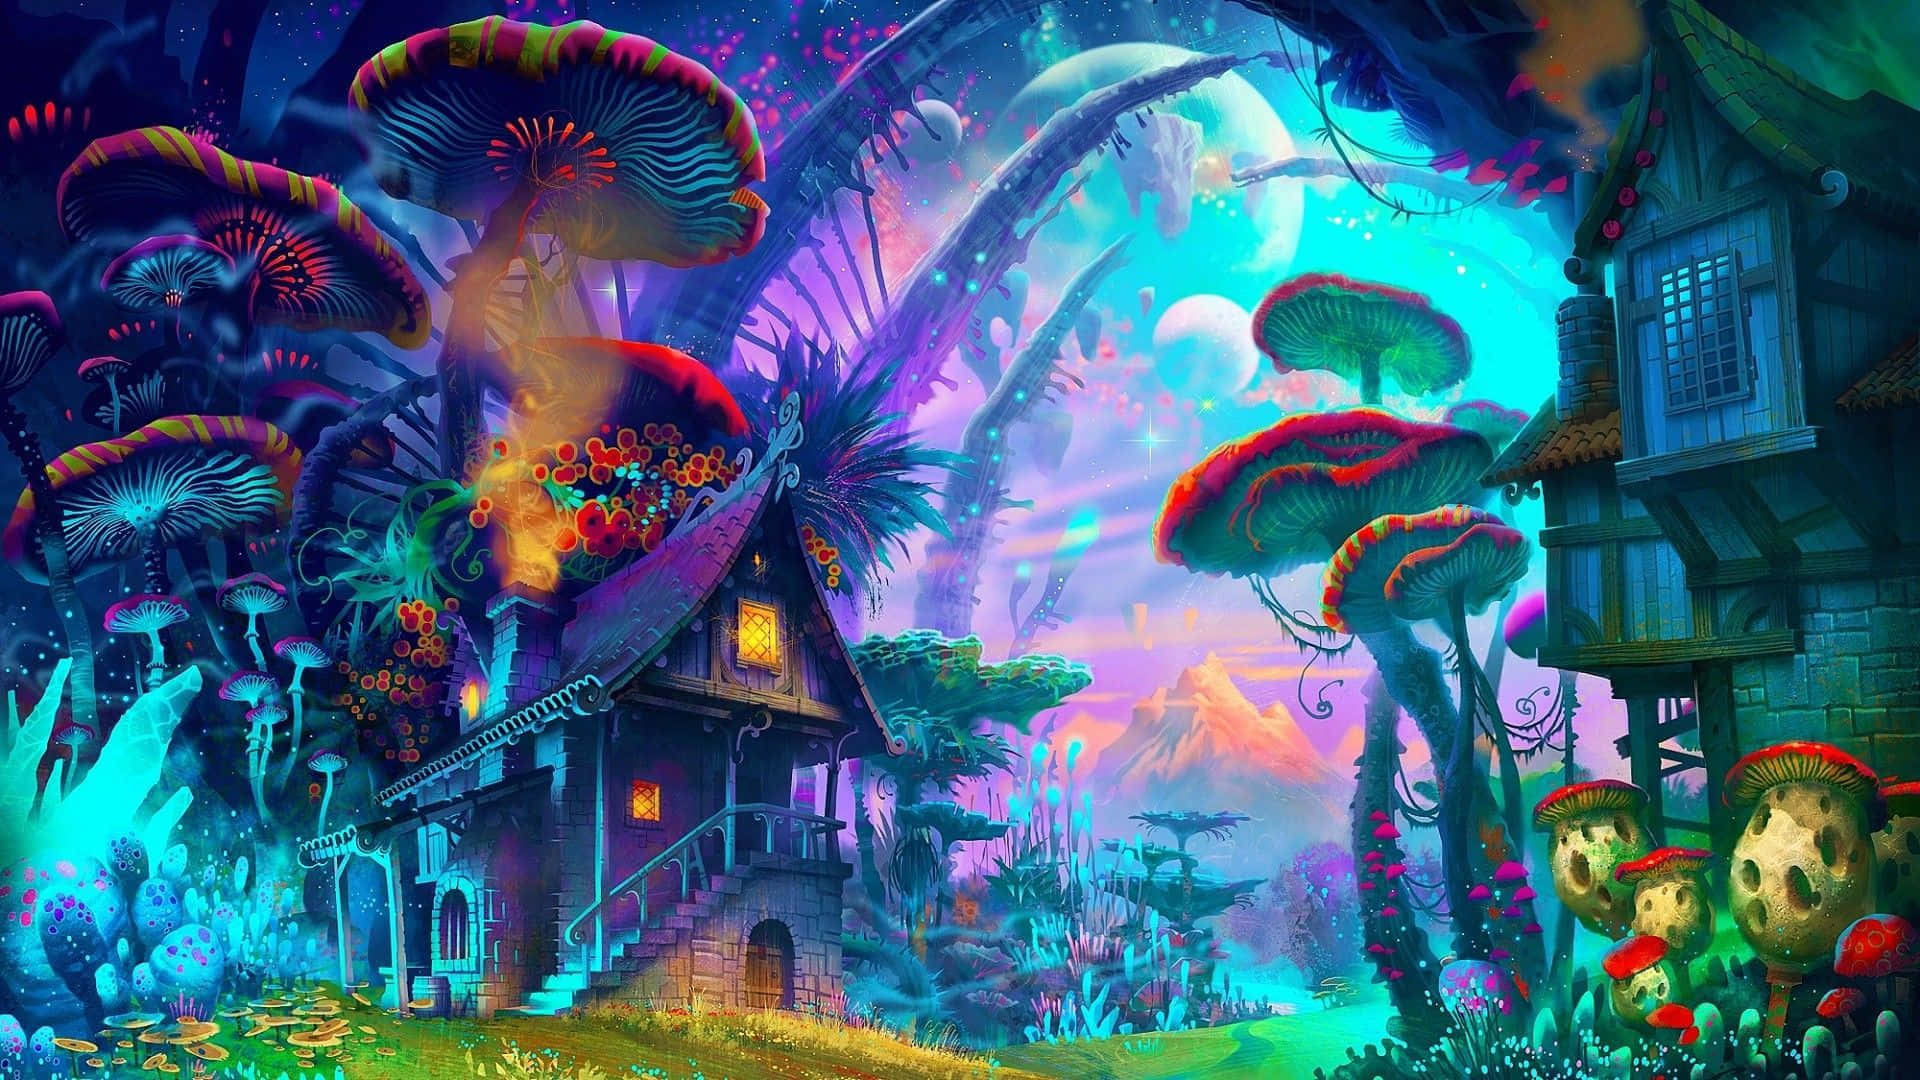 Enjoy a psychedelic journey with Trippy Mushroom! Wallpaper